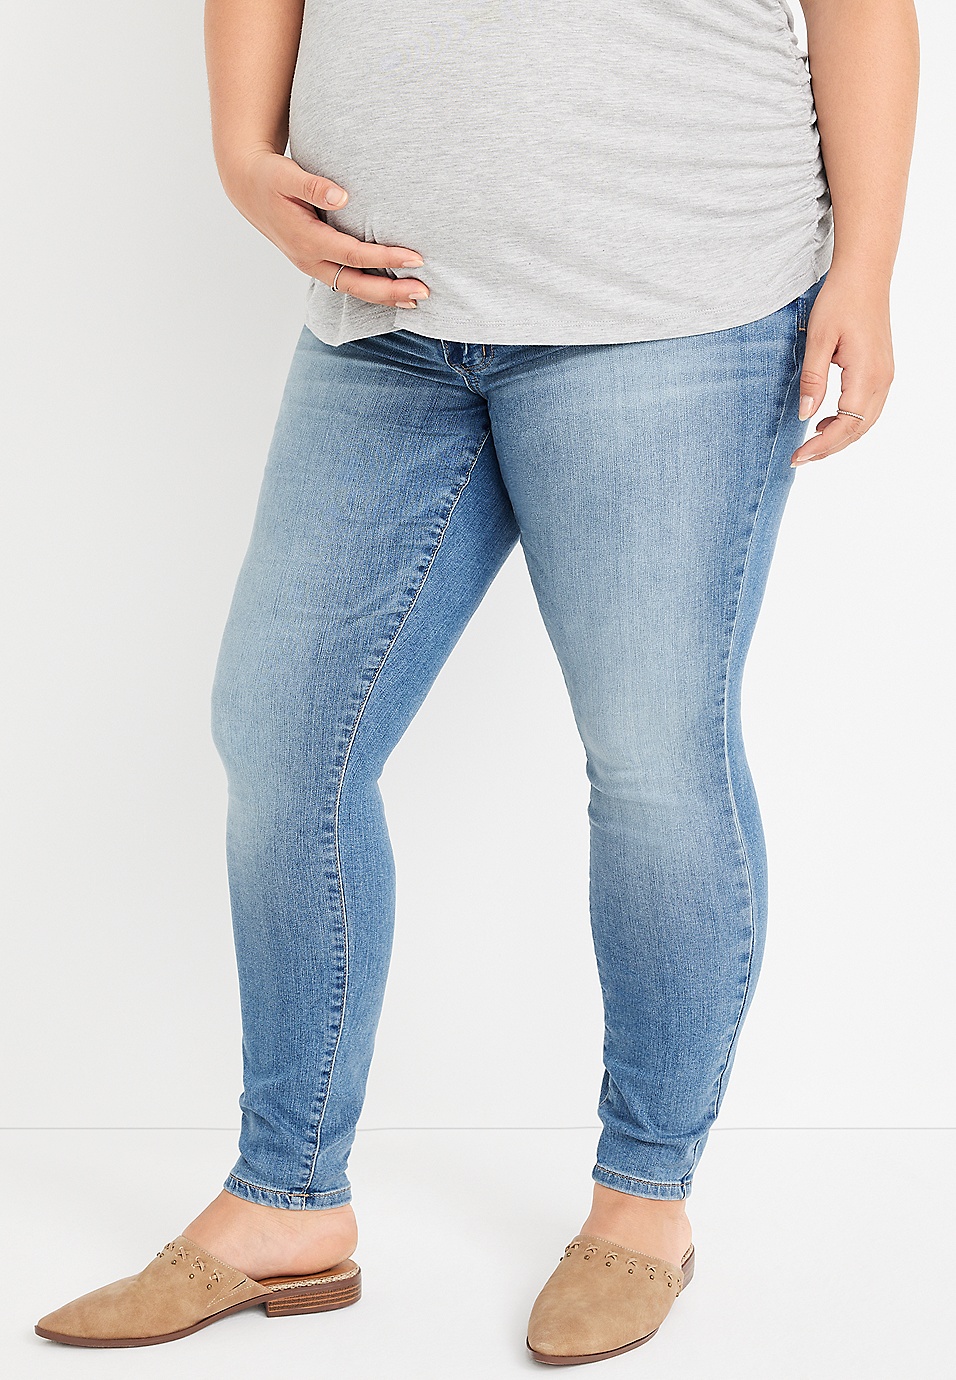 Size m jeans by maurices™ Super Skinny Side Panel Maternity Jean | maurices